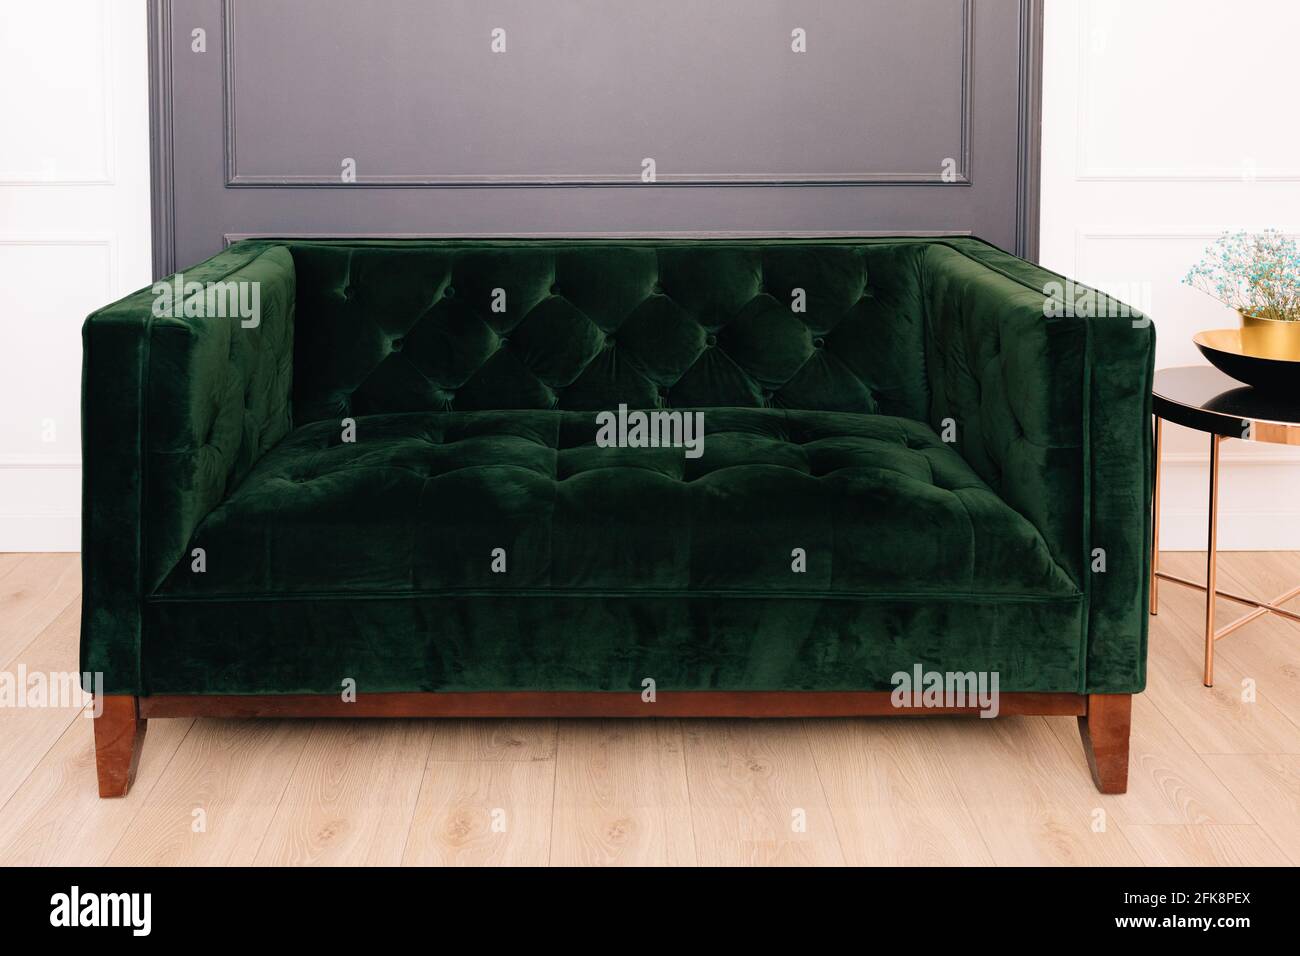 Dark green malachite velor sofa in the interior. Capitone textile, suede, velour, with buttons Stock Photo